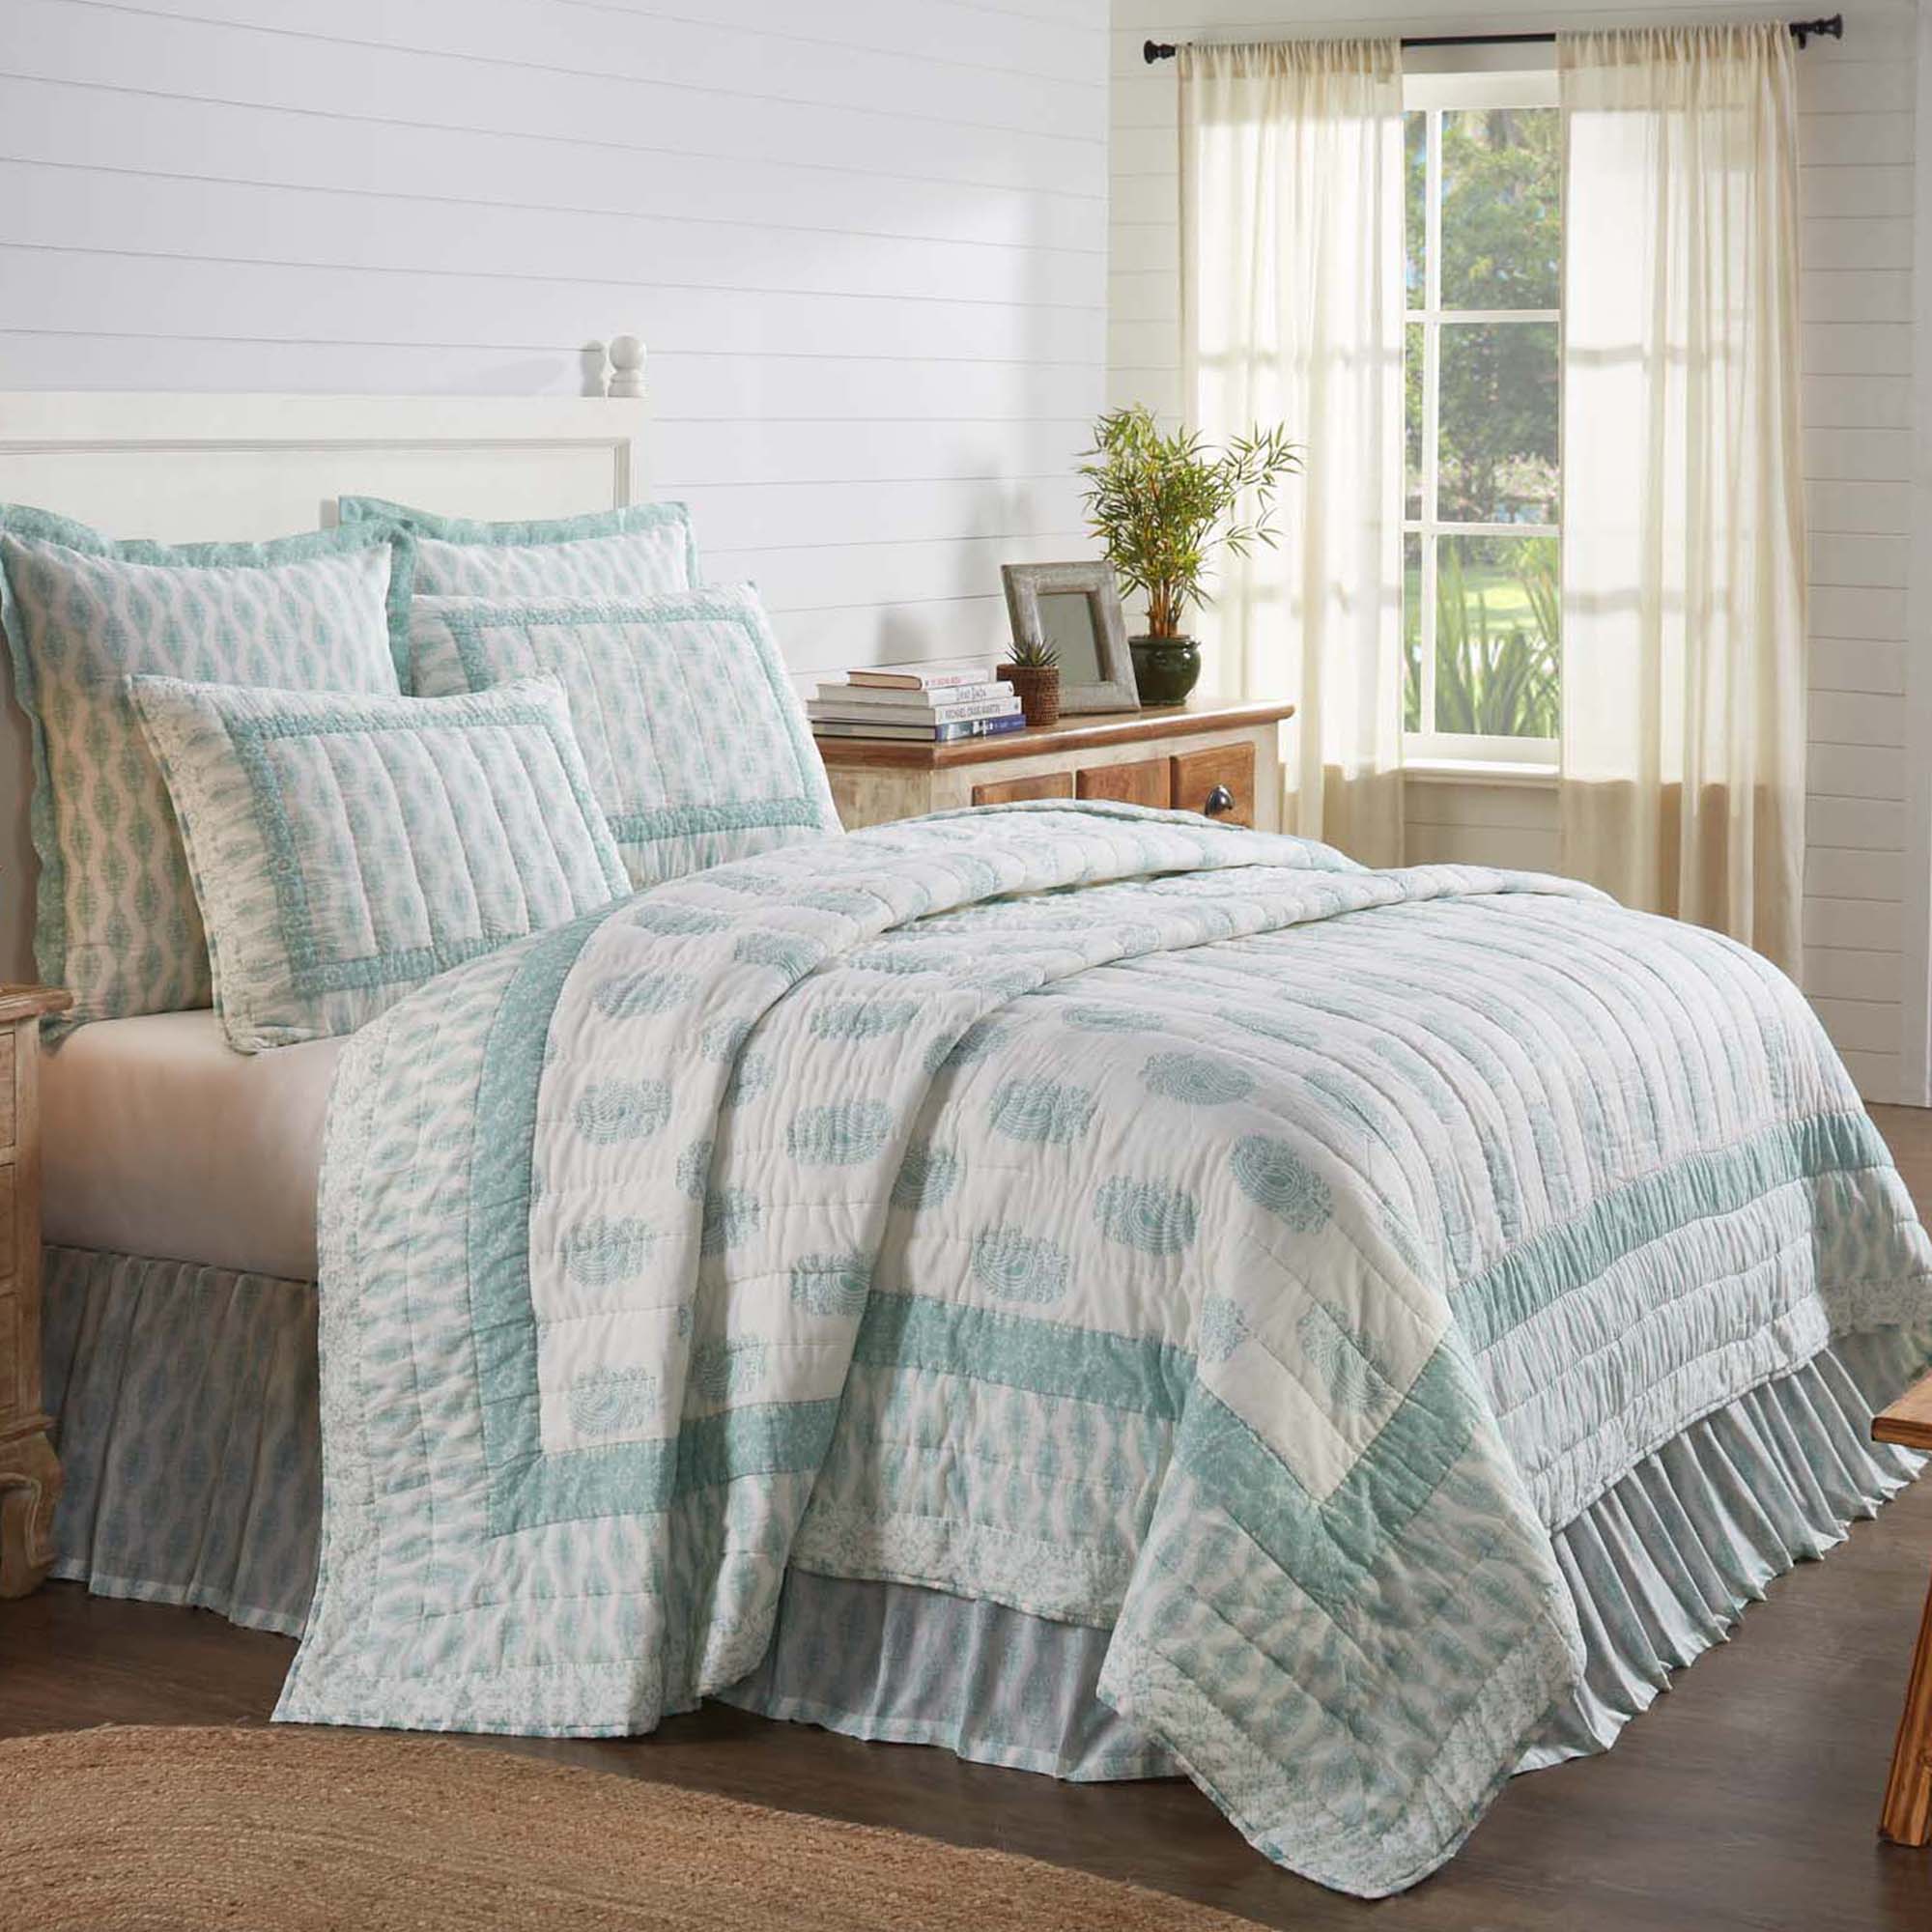 April & Olive Avani Sea Glass King Quilt 105Wx95L By VHC Brands